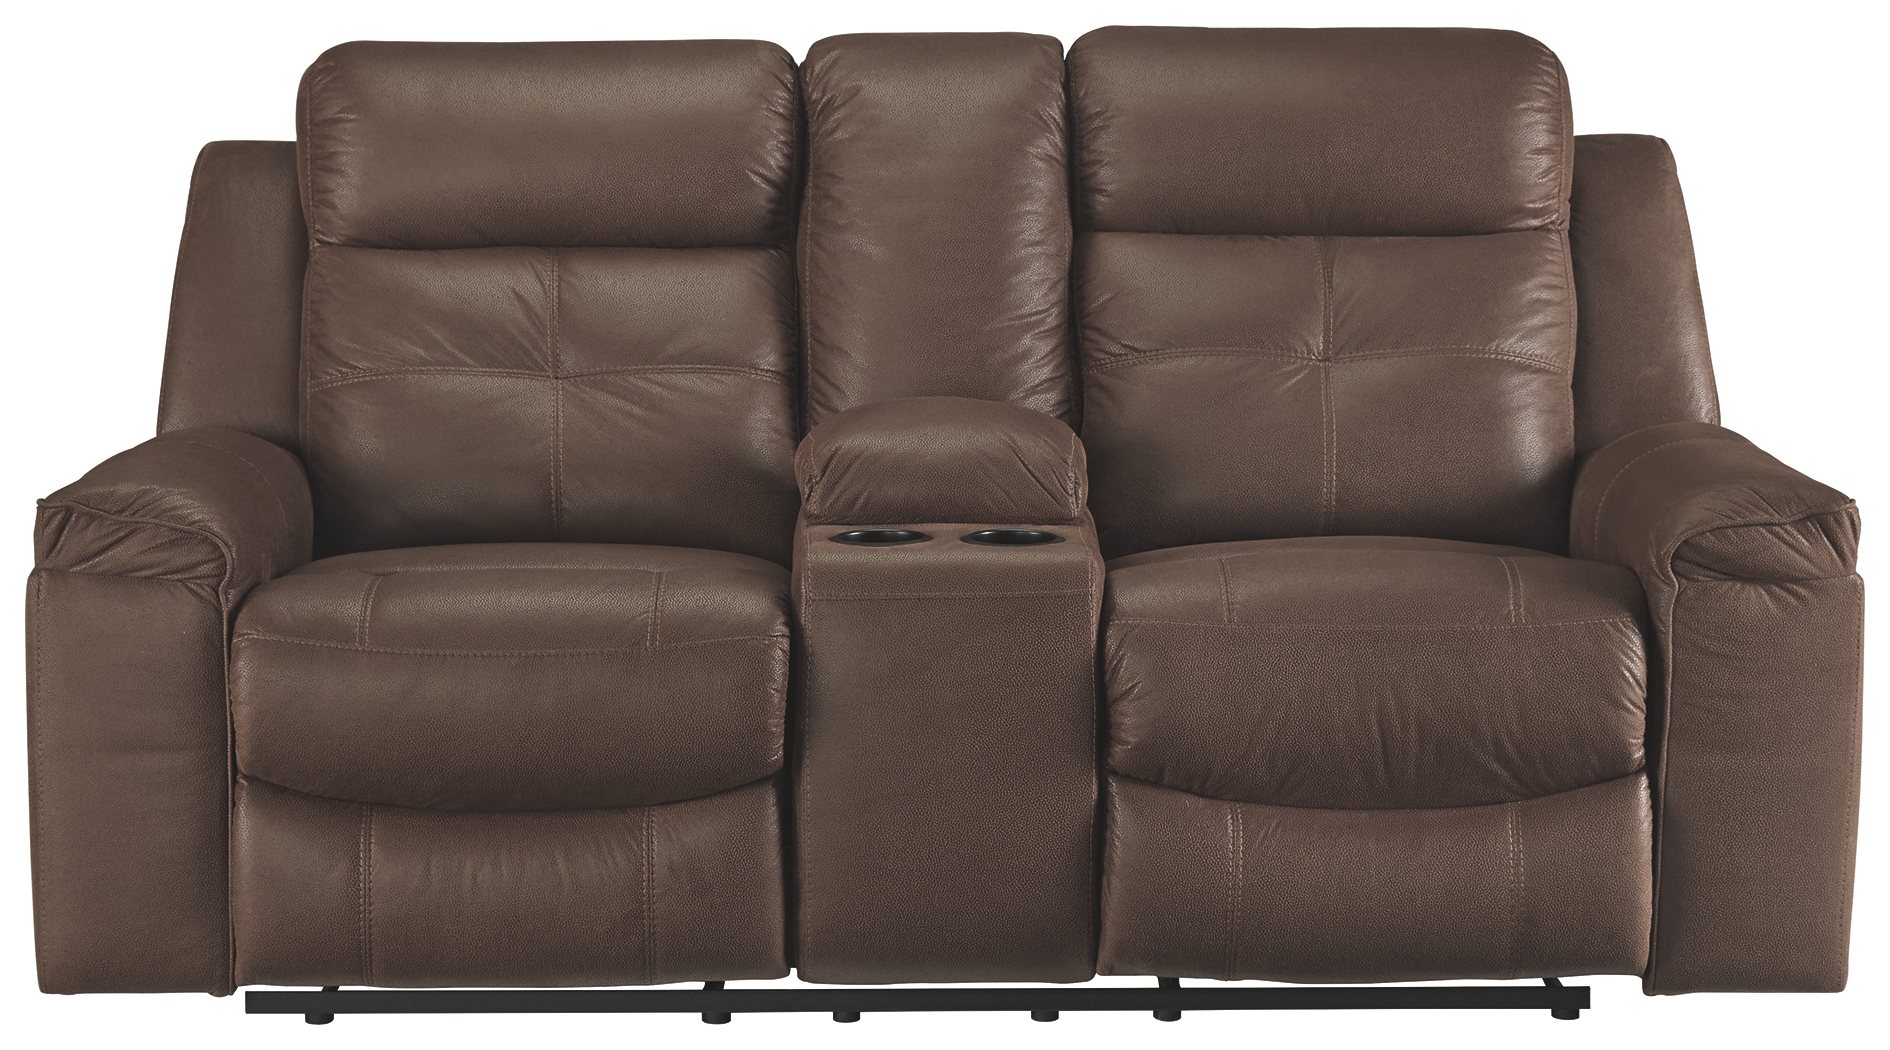 Signature Design by Ashley® Jesolo Coffee Double Reclining Console Loveseat